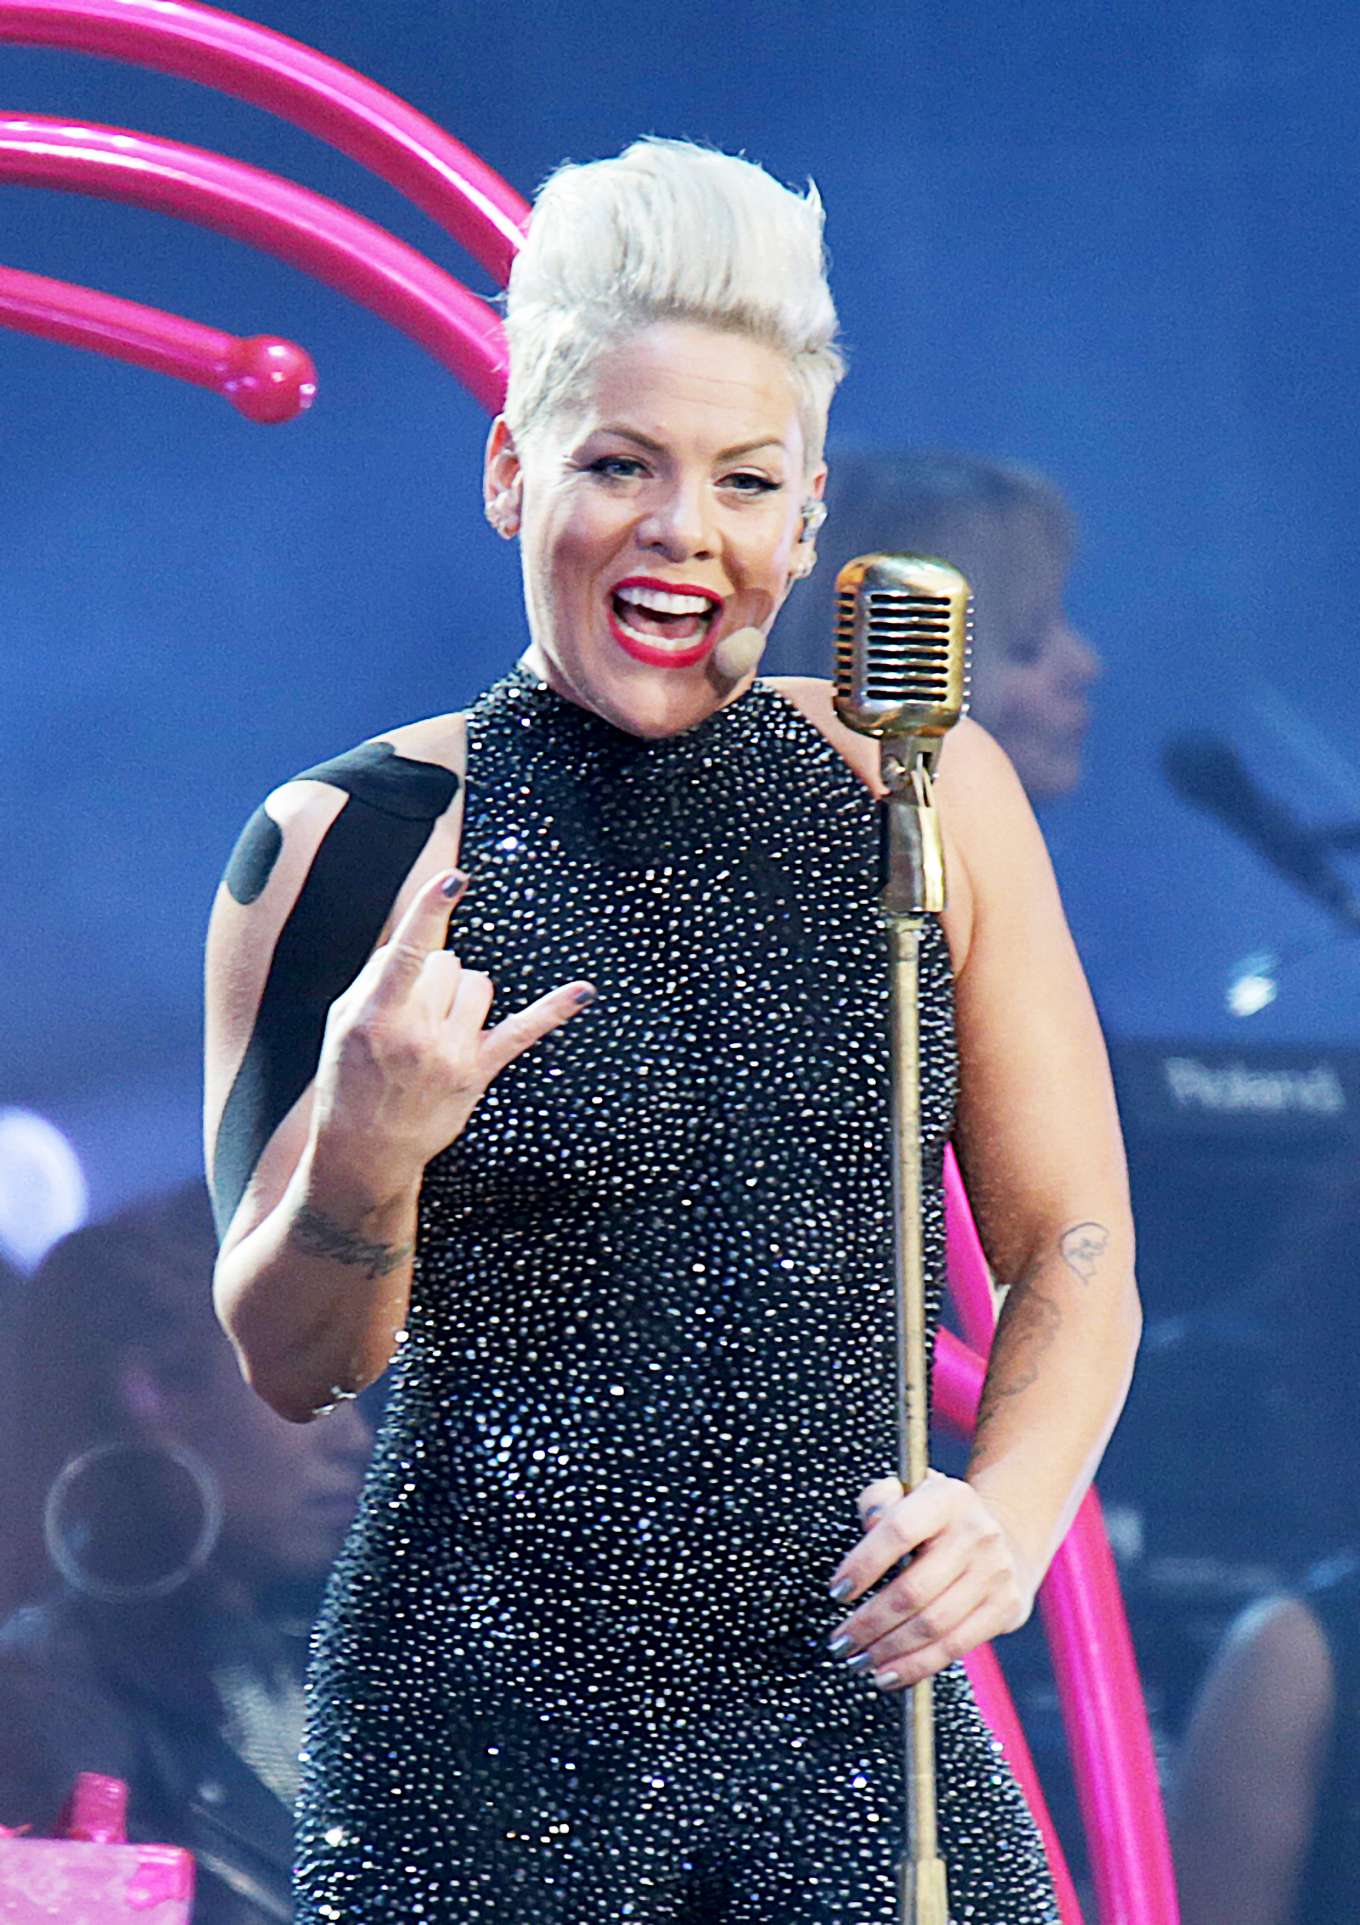 is pink on tour right now